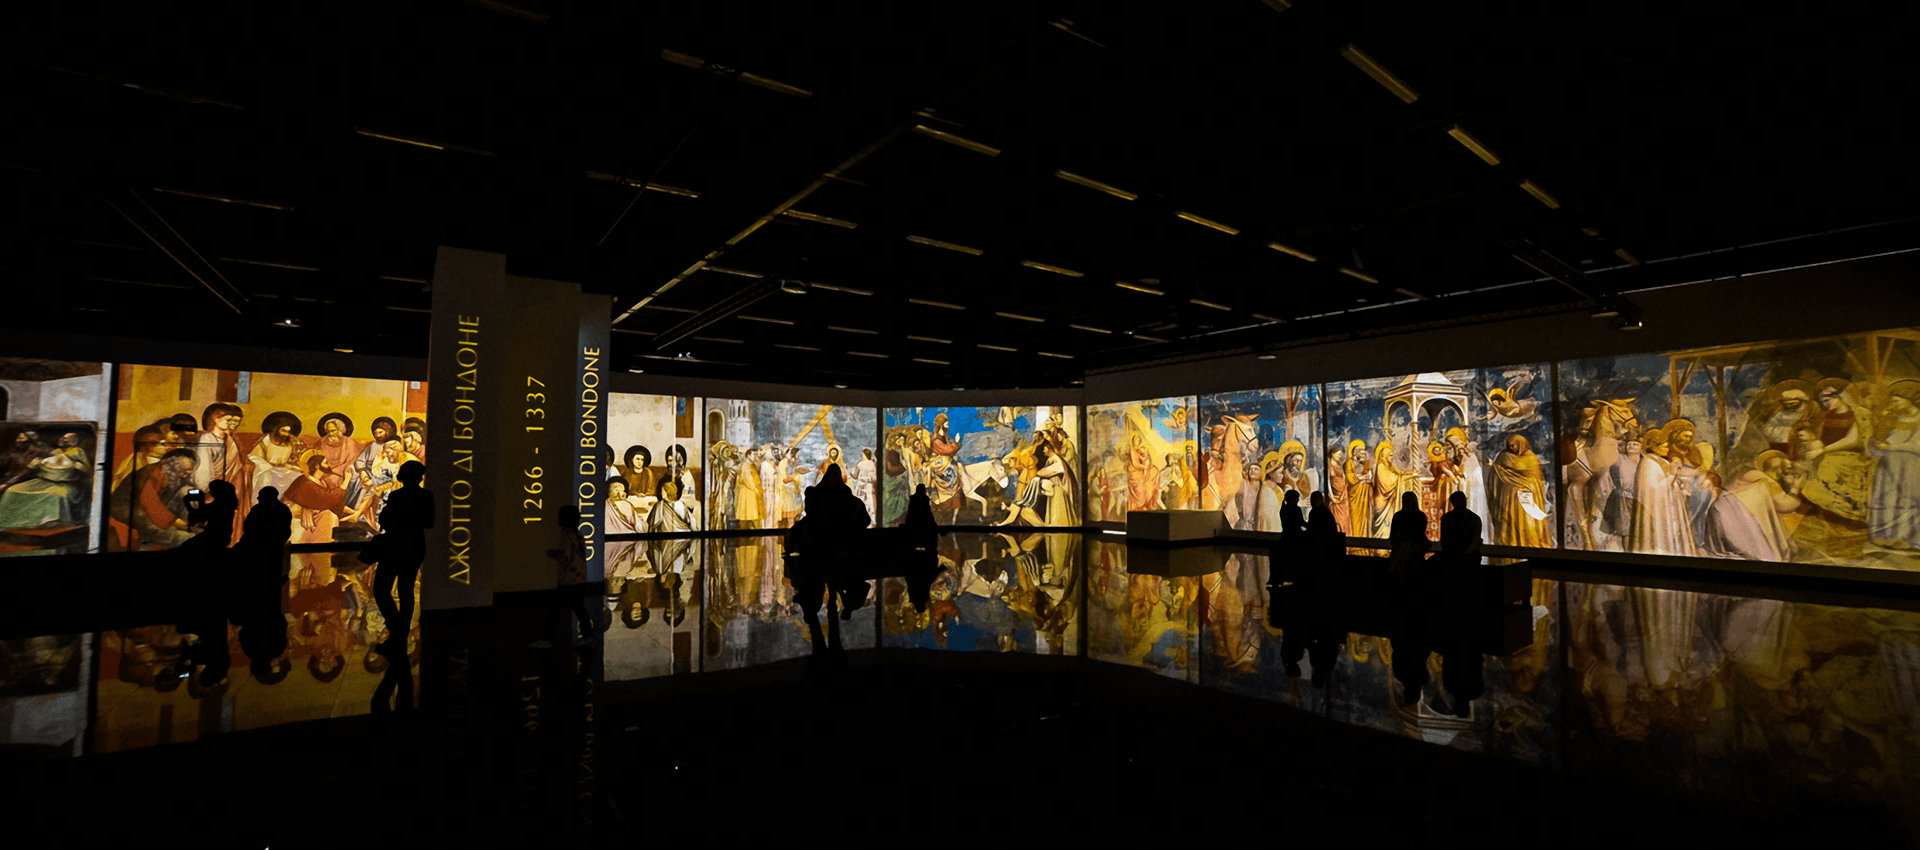 Group of visitors immersed in the Screeberry-driven projection of classical artworks at A-Gallery